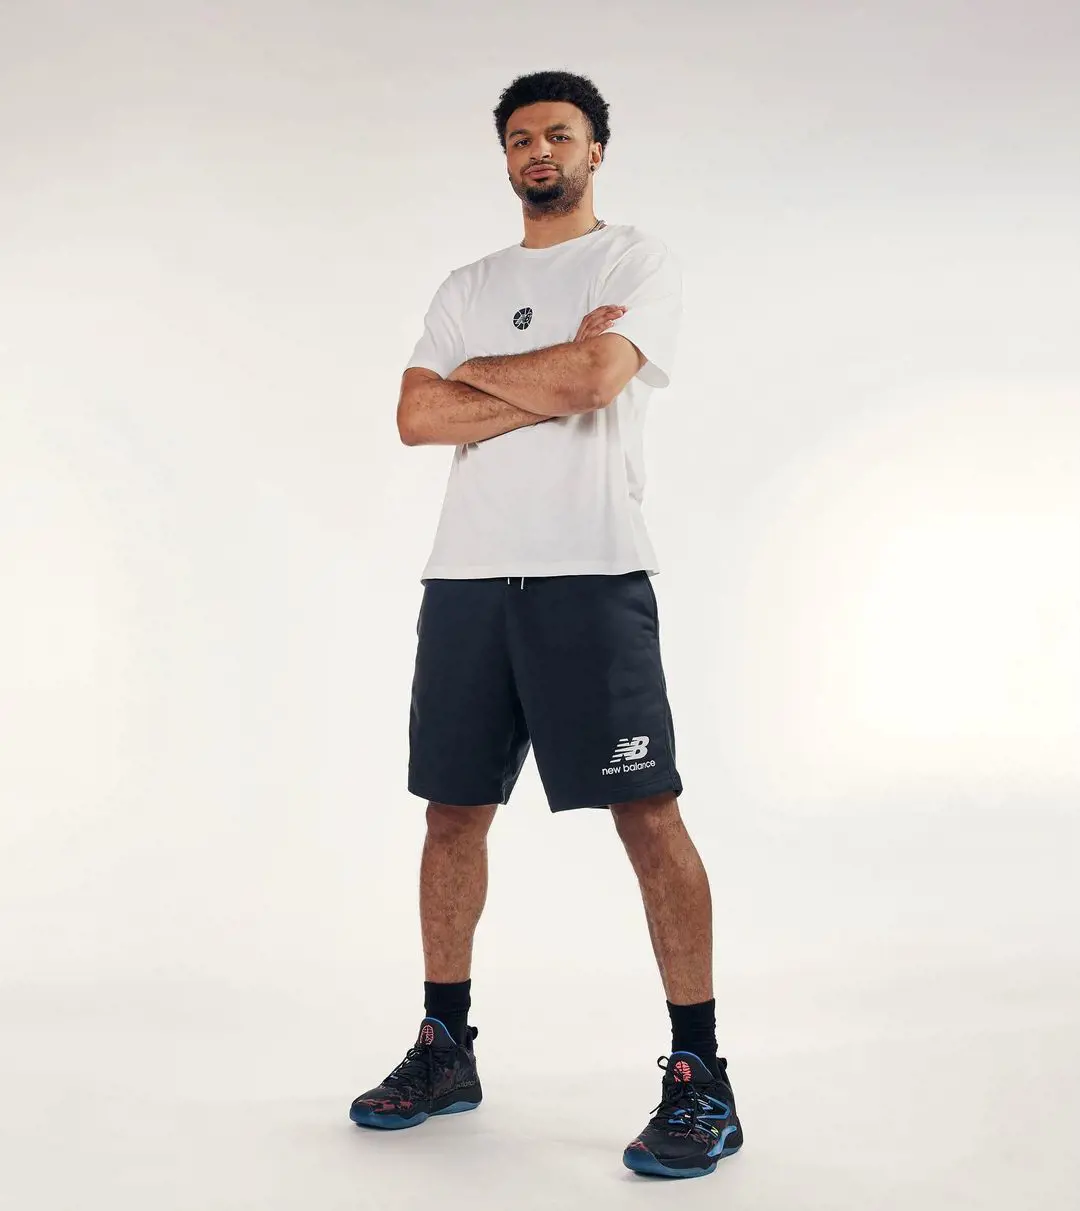 Jamal reveal the new balance TWO WXY shoes launched date through his Instagram acount on November 5, 2022.